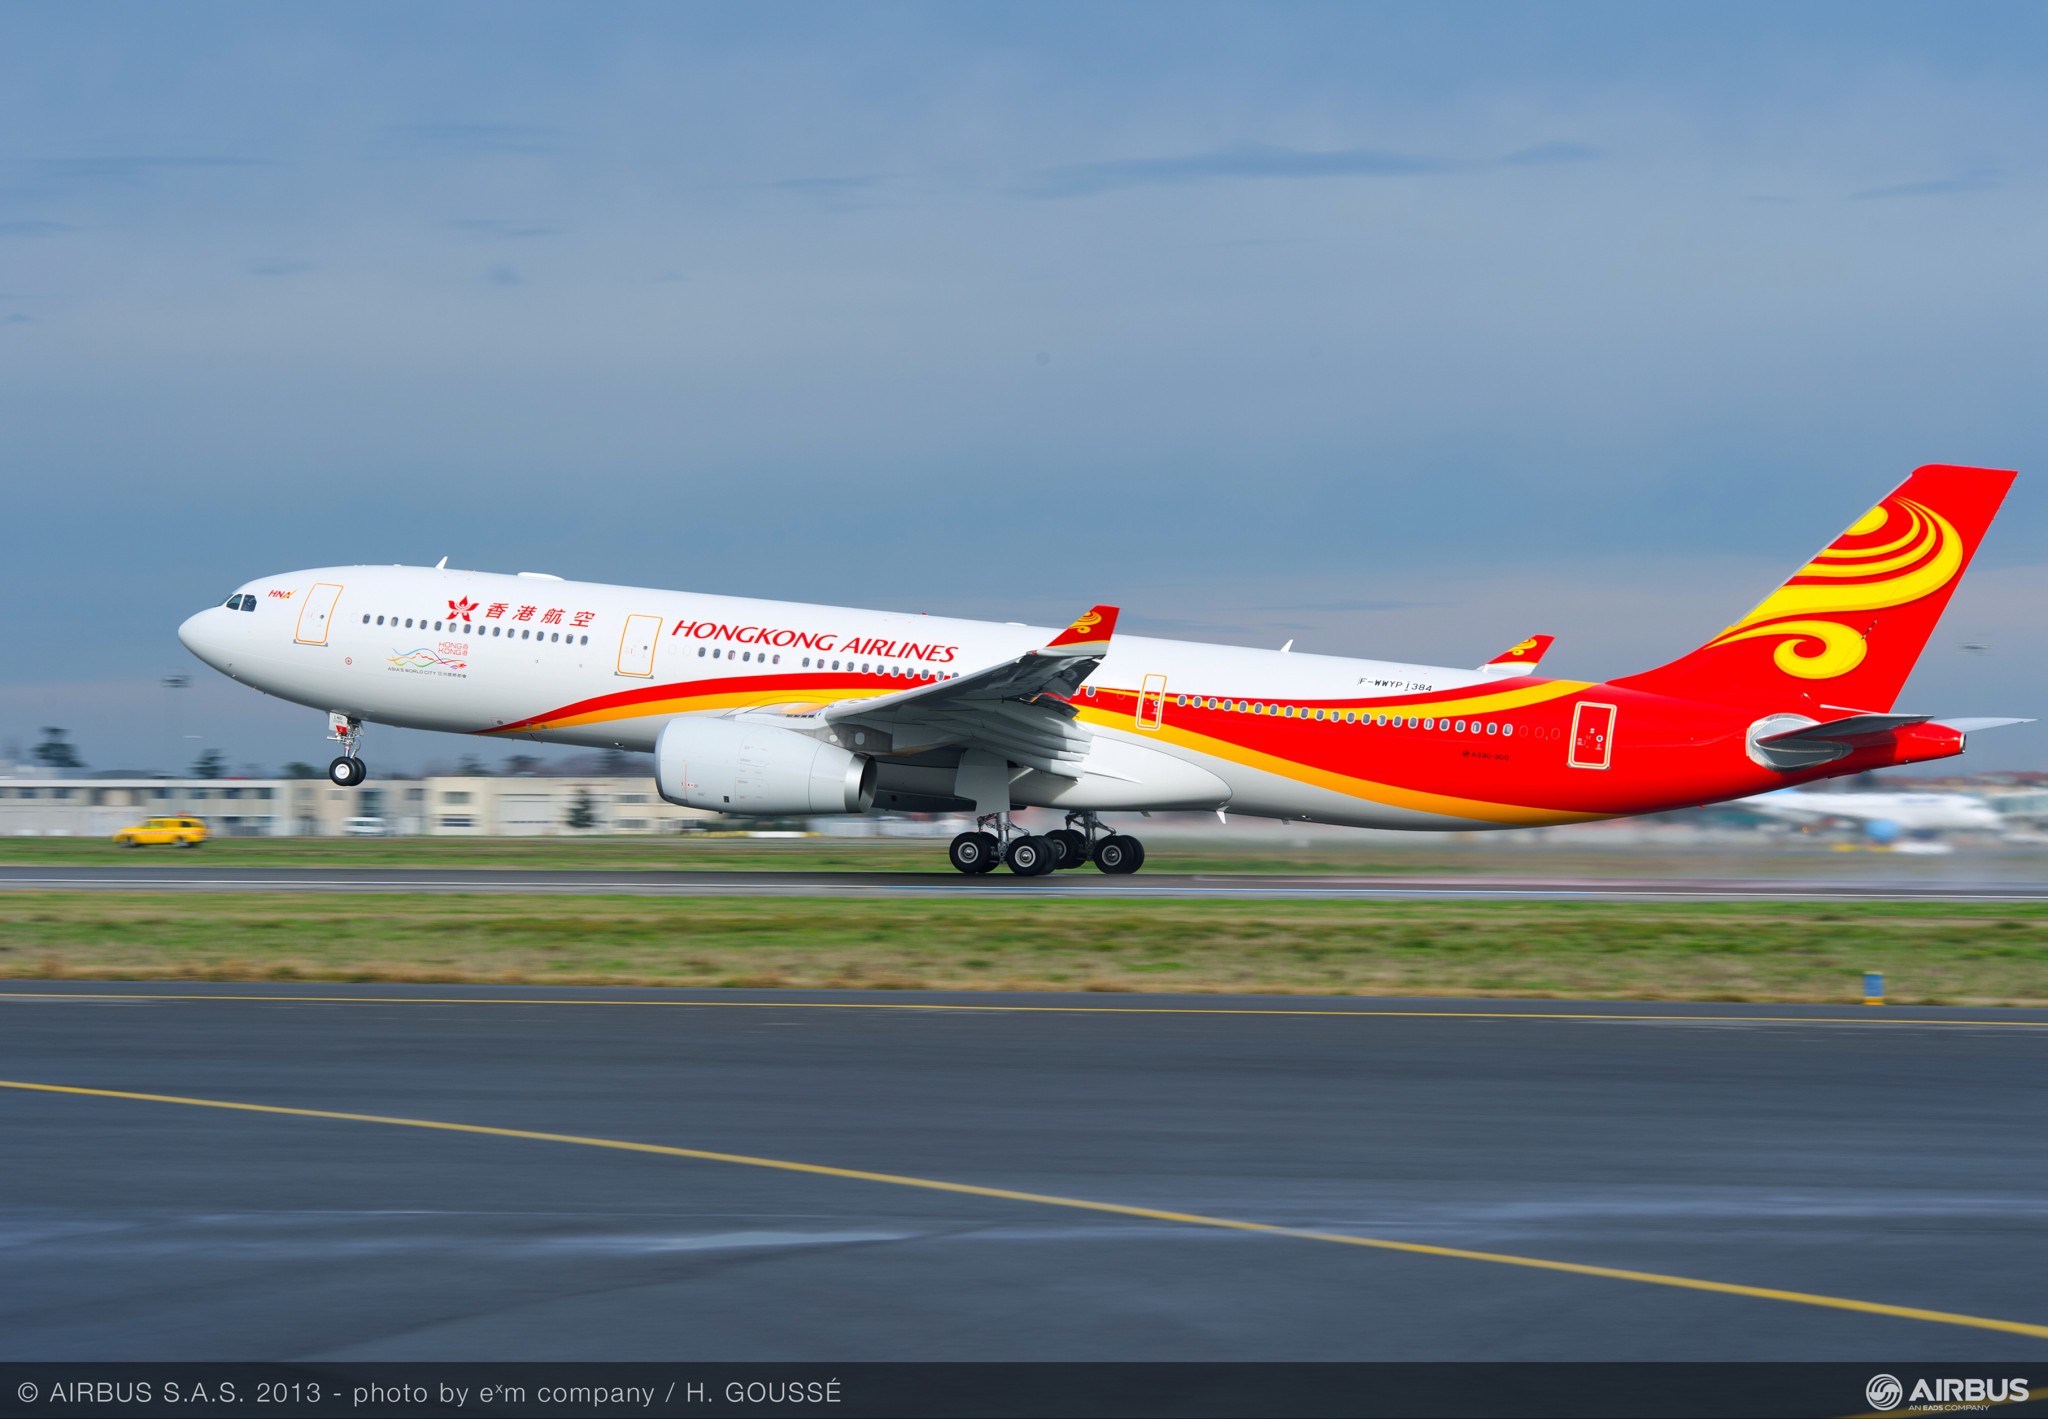 Hong Kong Airlines to continue operations after receiving cash injection